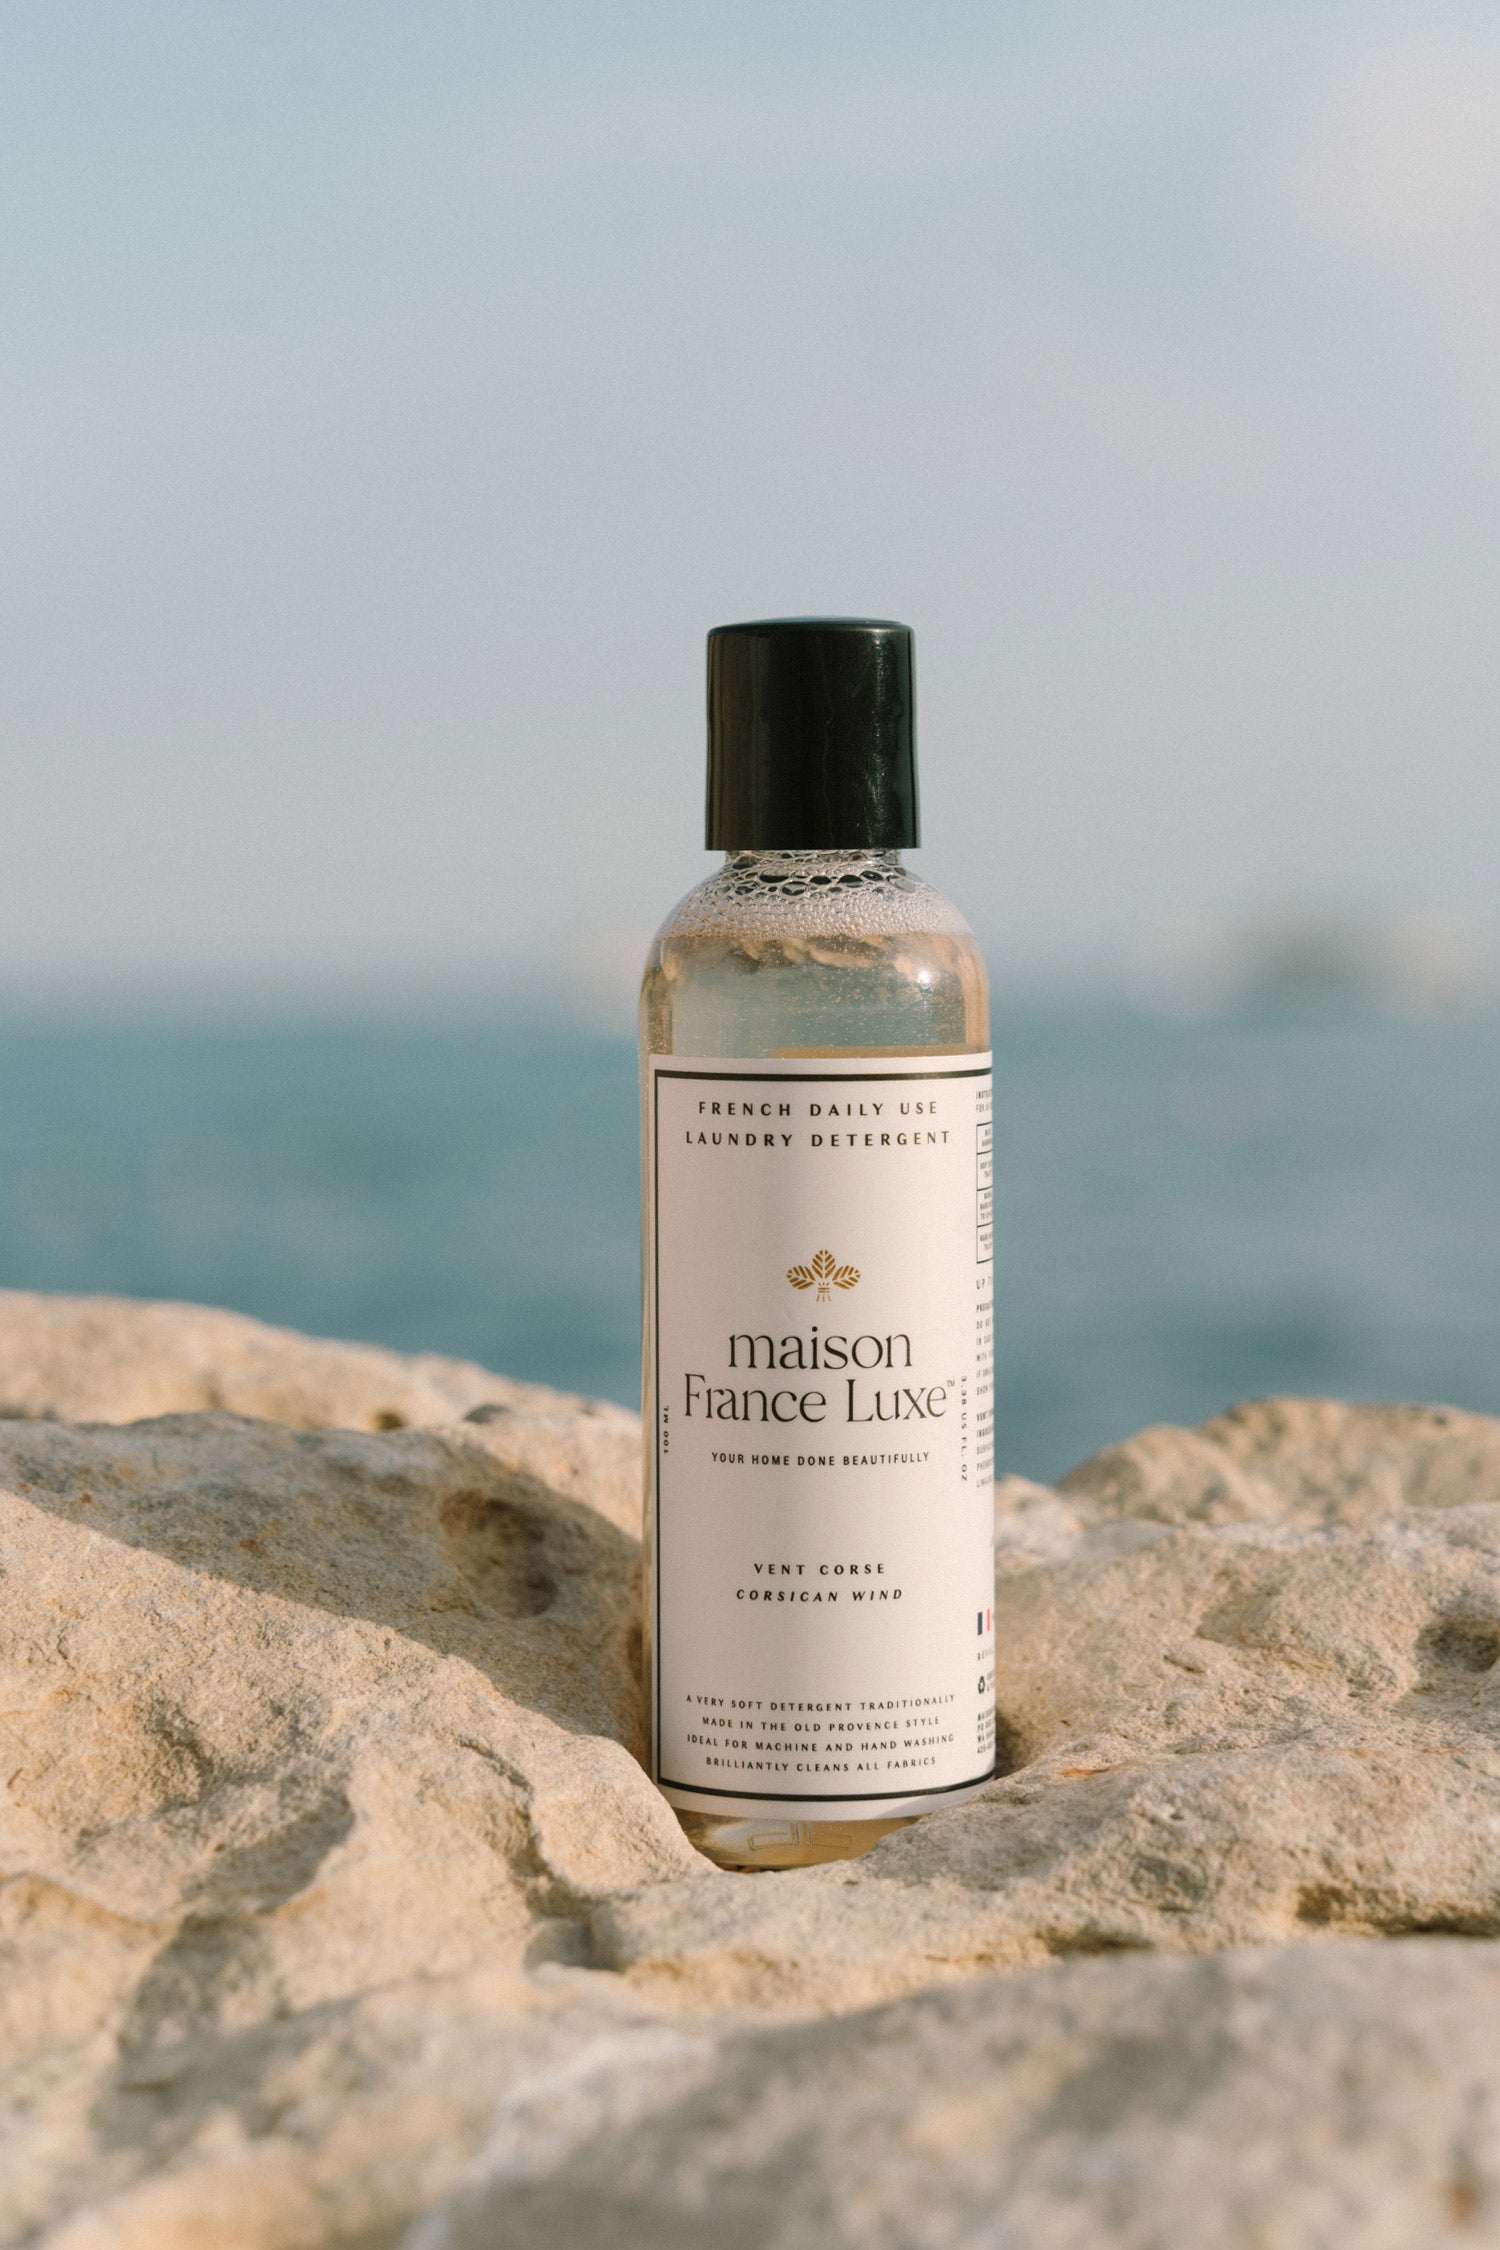 Luxury French Laundry Soap in a travel size. Corsican wind scent. Plant-based soap made in France.